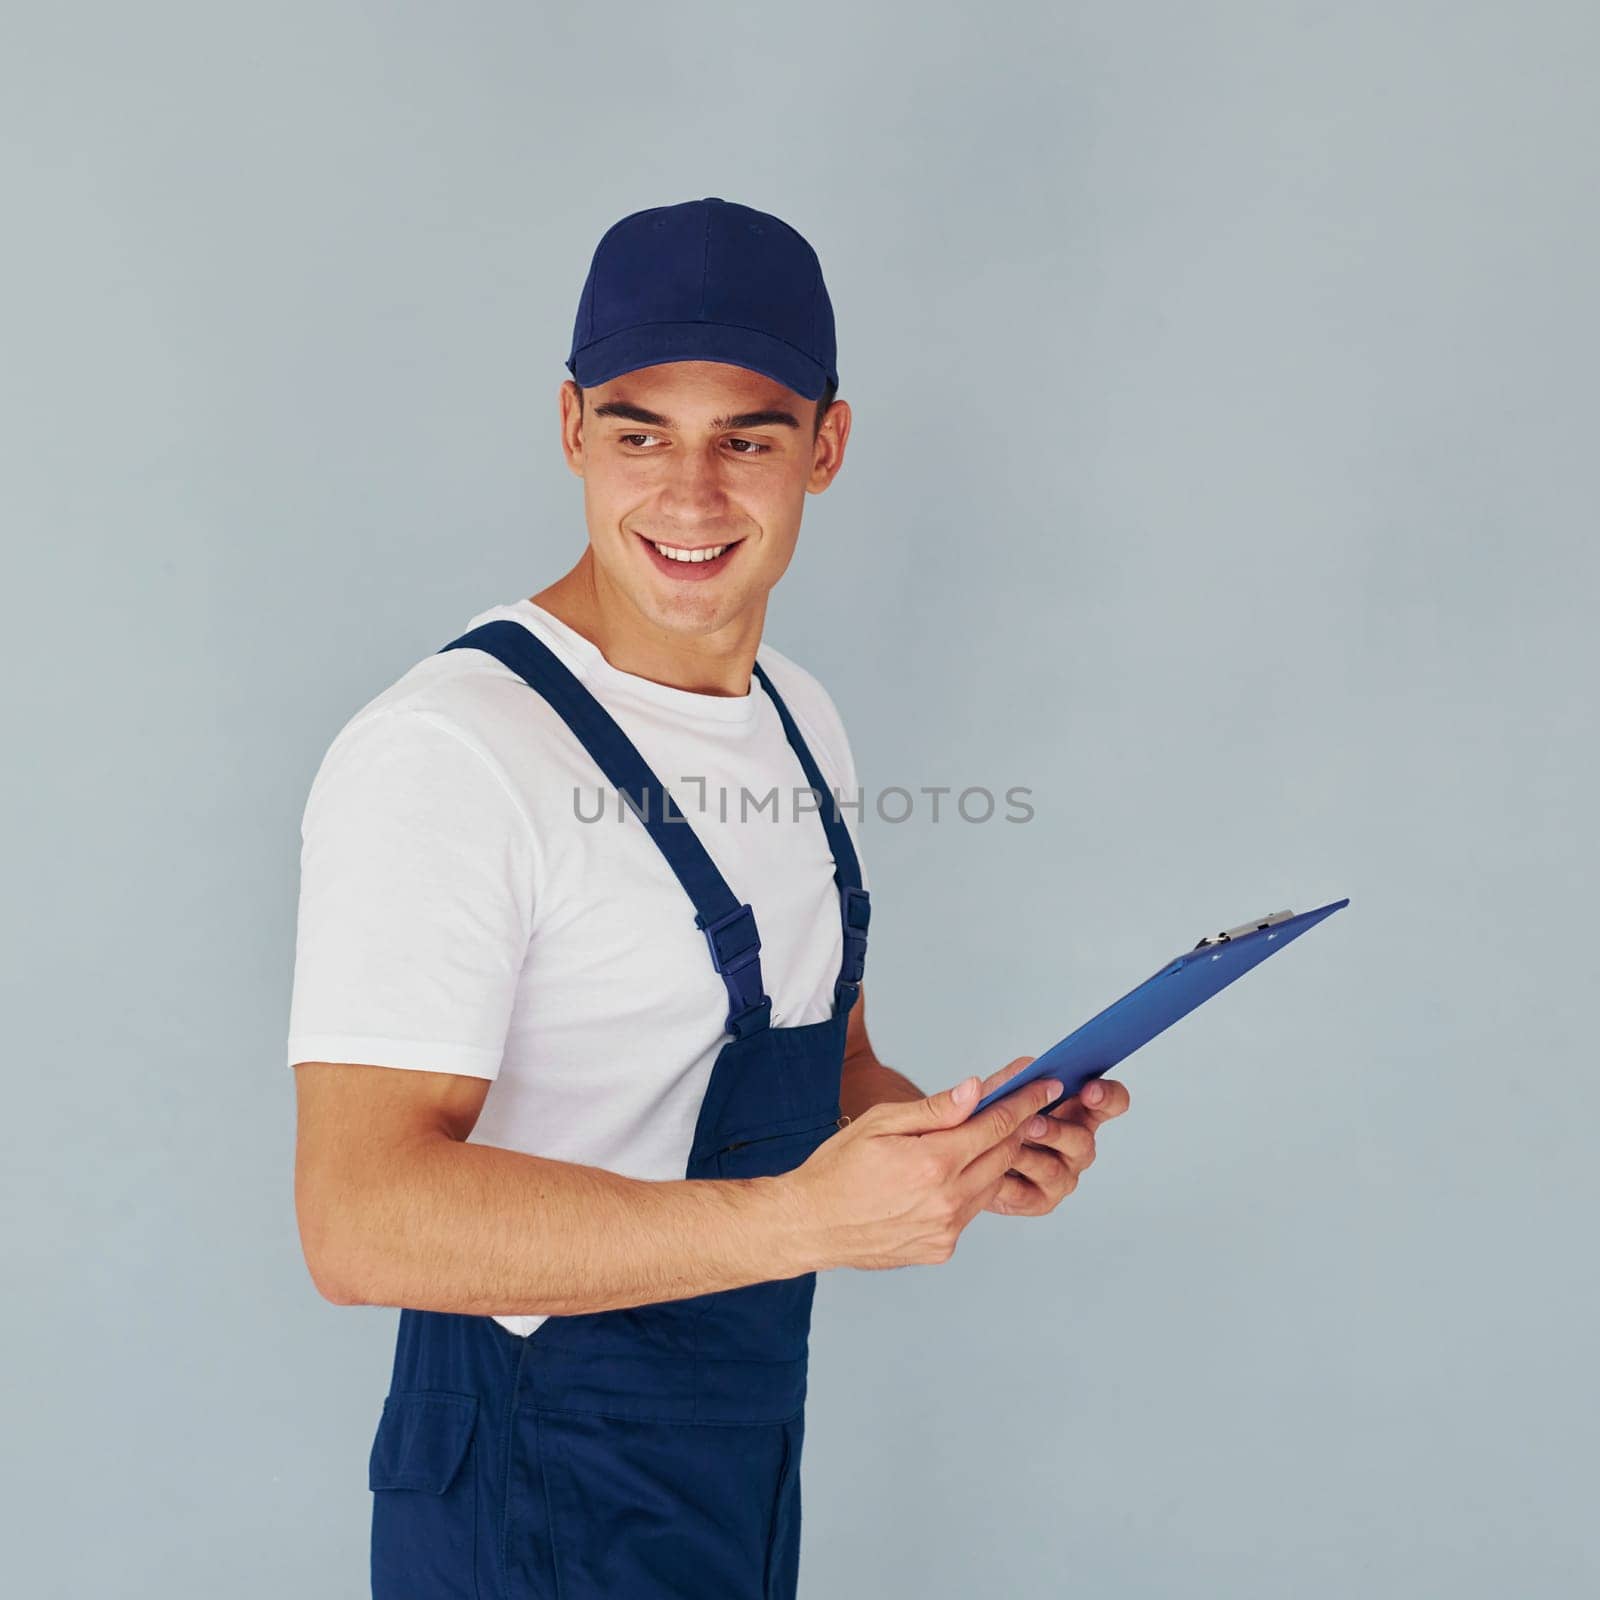 In cap and with notepad. Male worker in blue uniform standing inside of studio against white background.